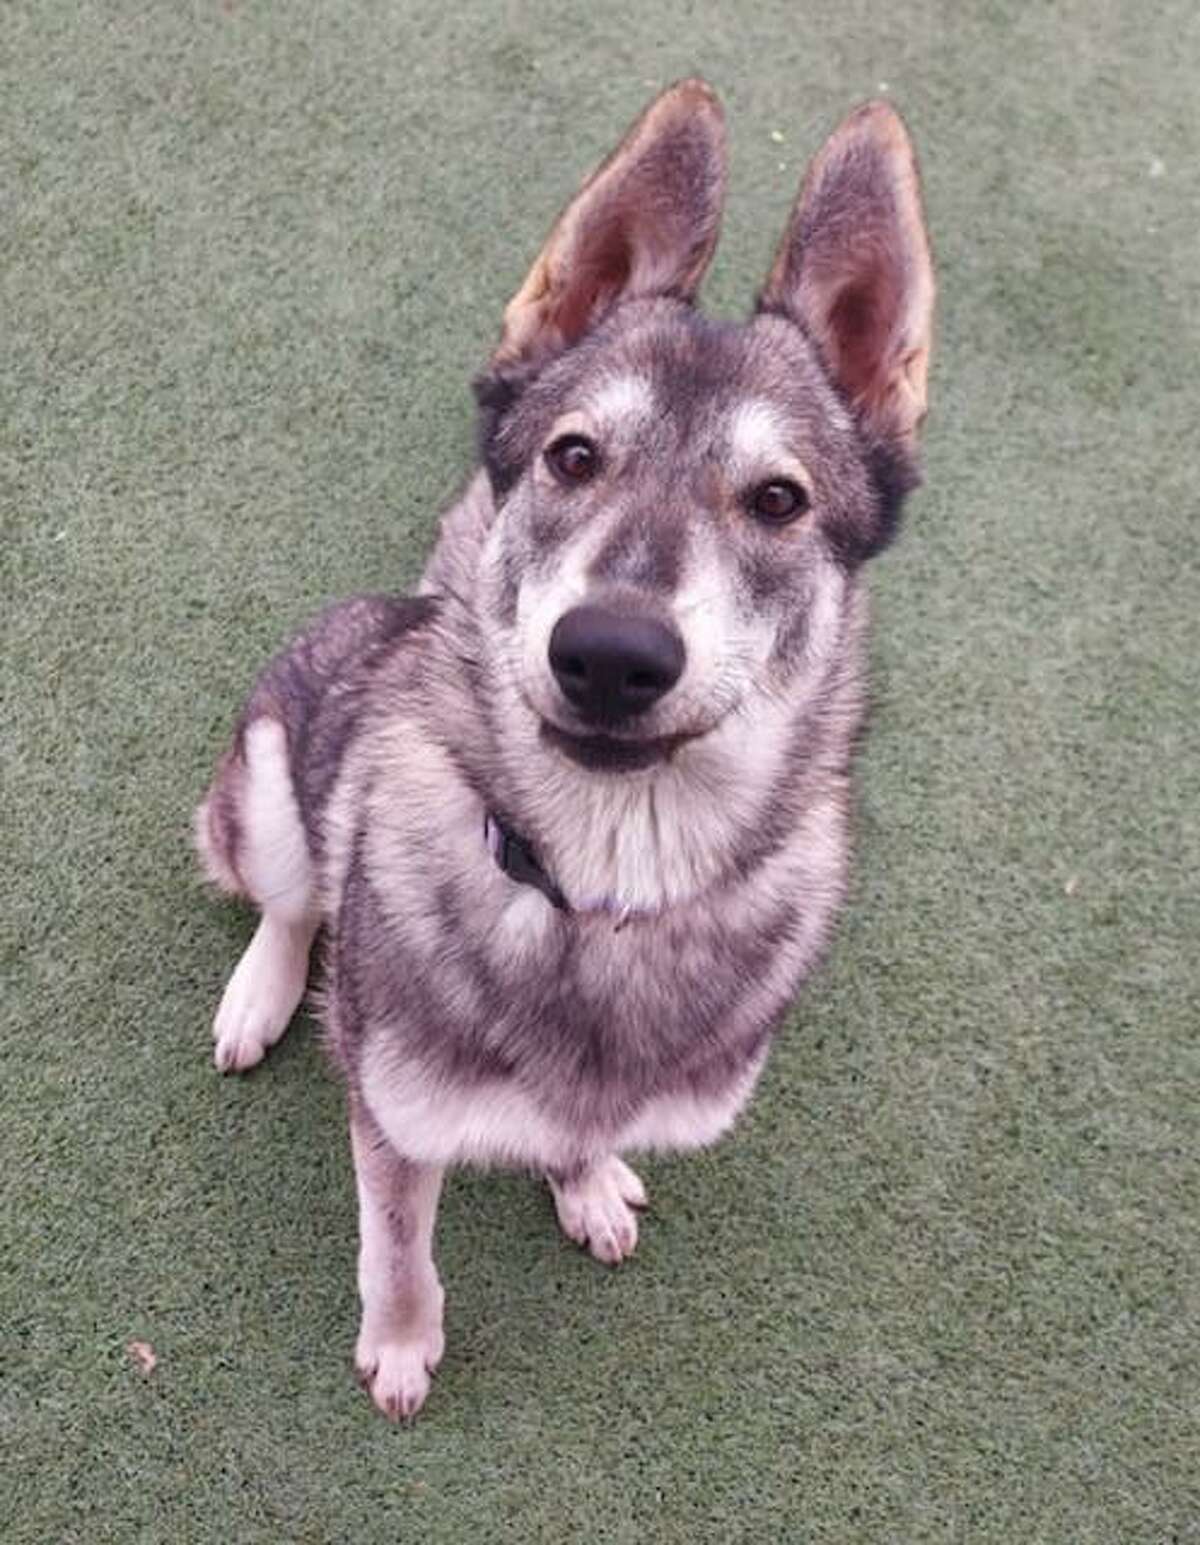 Roxy is a 1-year-old husky mix who was found in Alamo Heights. As of Friday, she is being cared for at Pup Pup And Away while she awaits adoption.